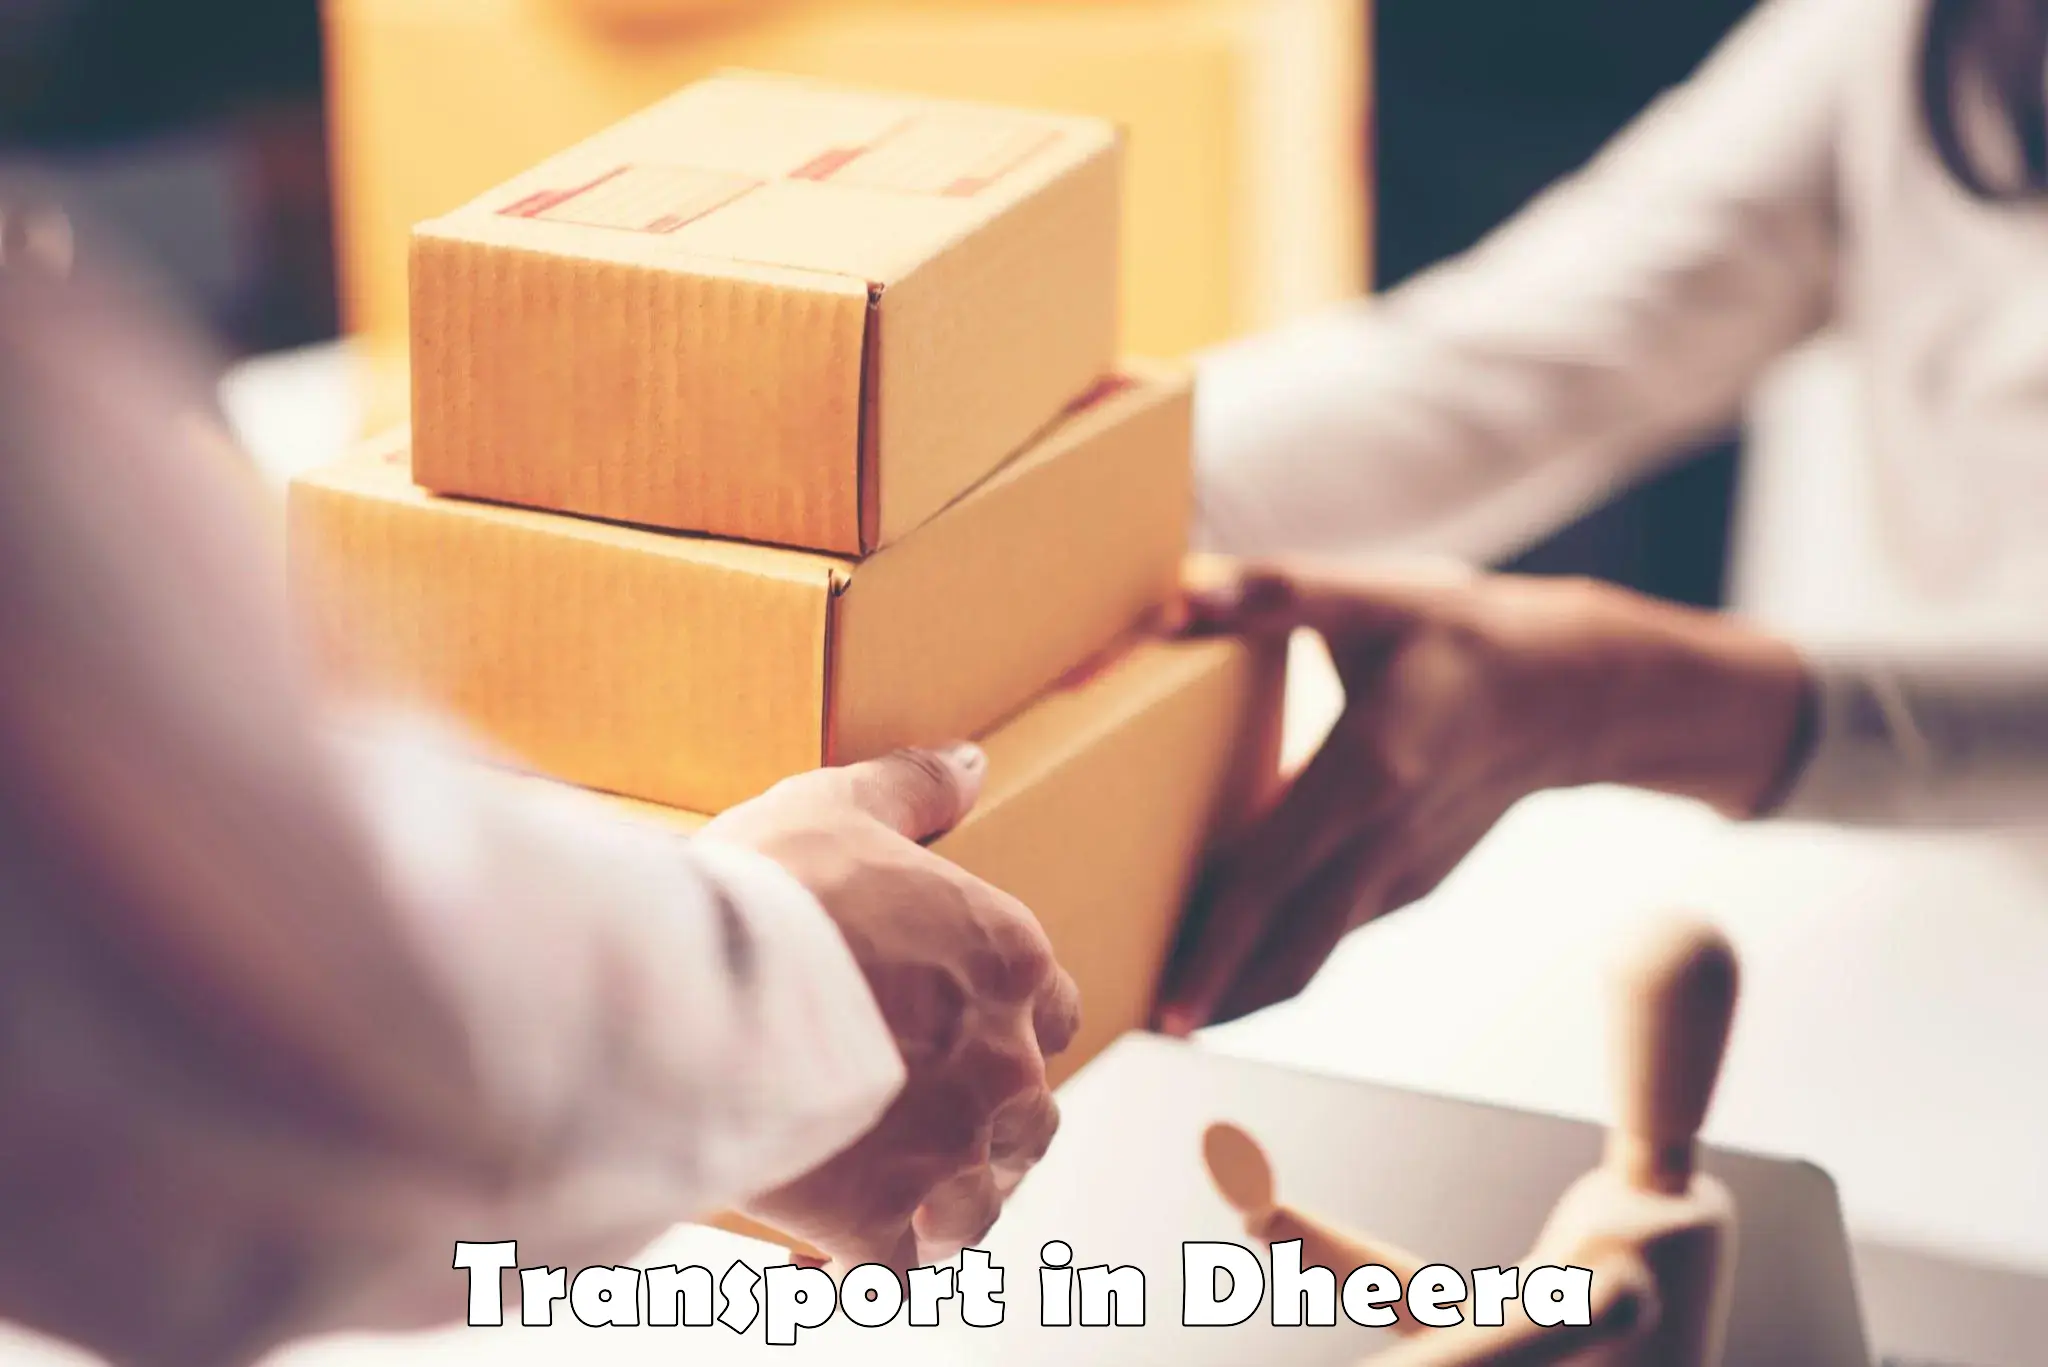 Shipping services in Dheera